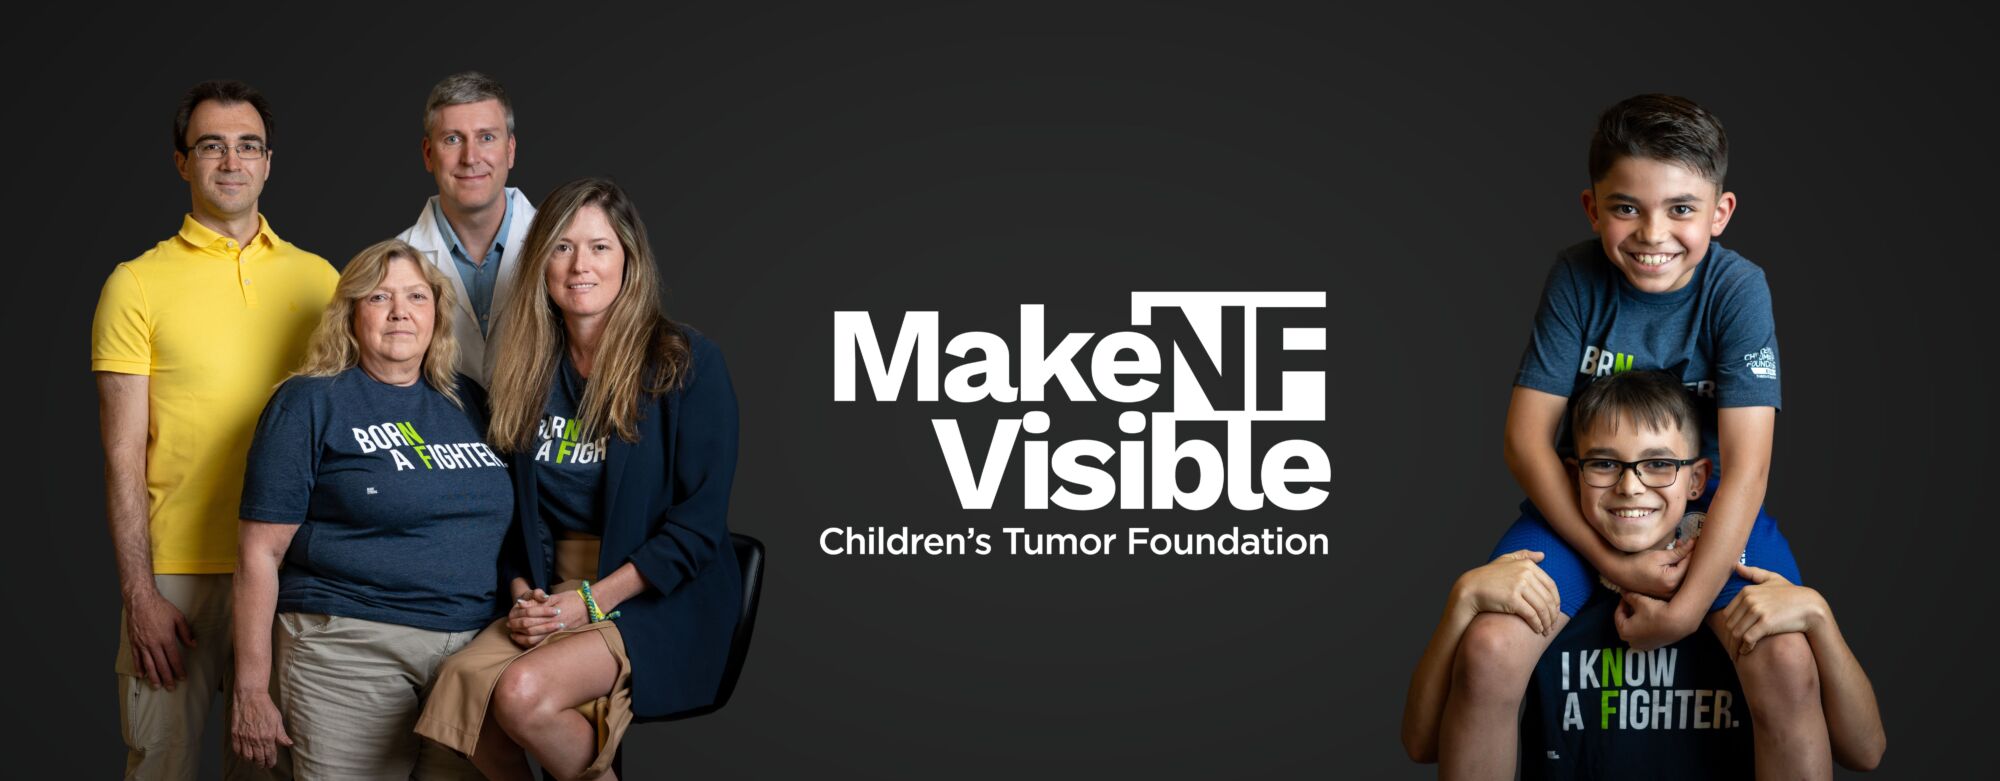 Group of five diverse people and a boy, some wearing shirts with supportive messages, standing beside the text "make nf visible" for the children's tumor foundation.